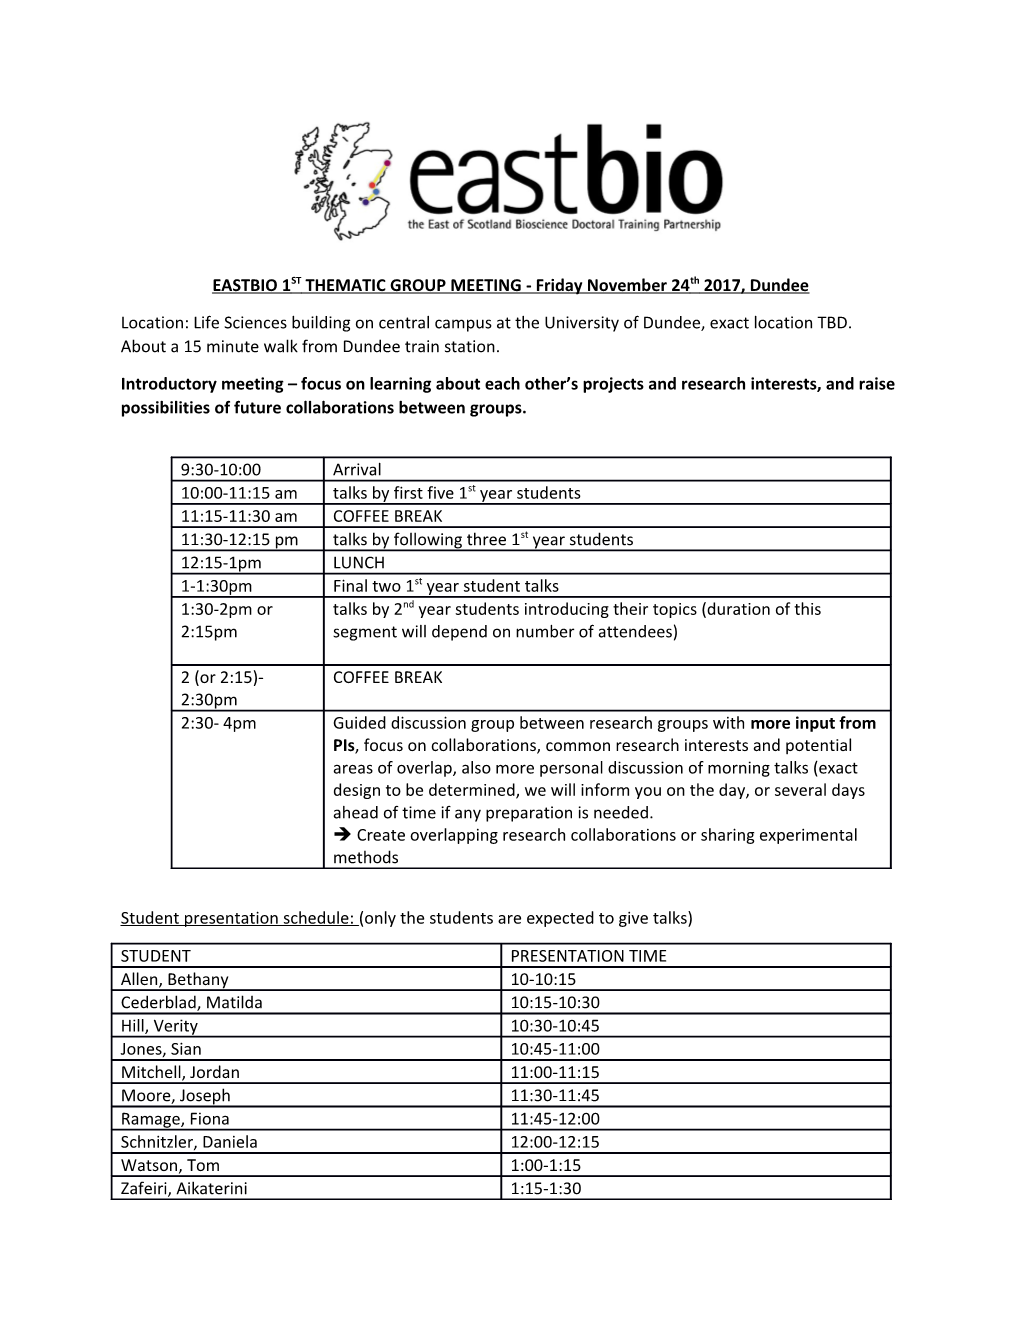 EASTBIO 1STTHEMATIC GROUP MEETING - Friday November 24Th 2017, Dundee